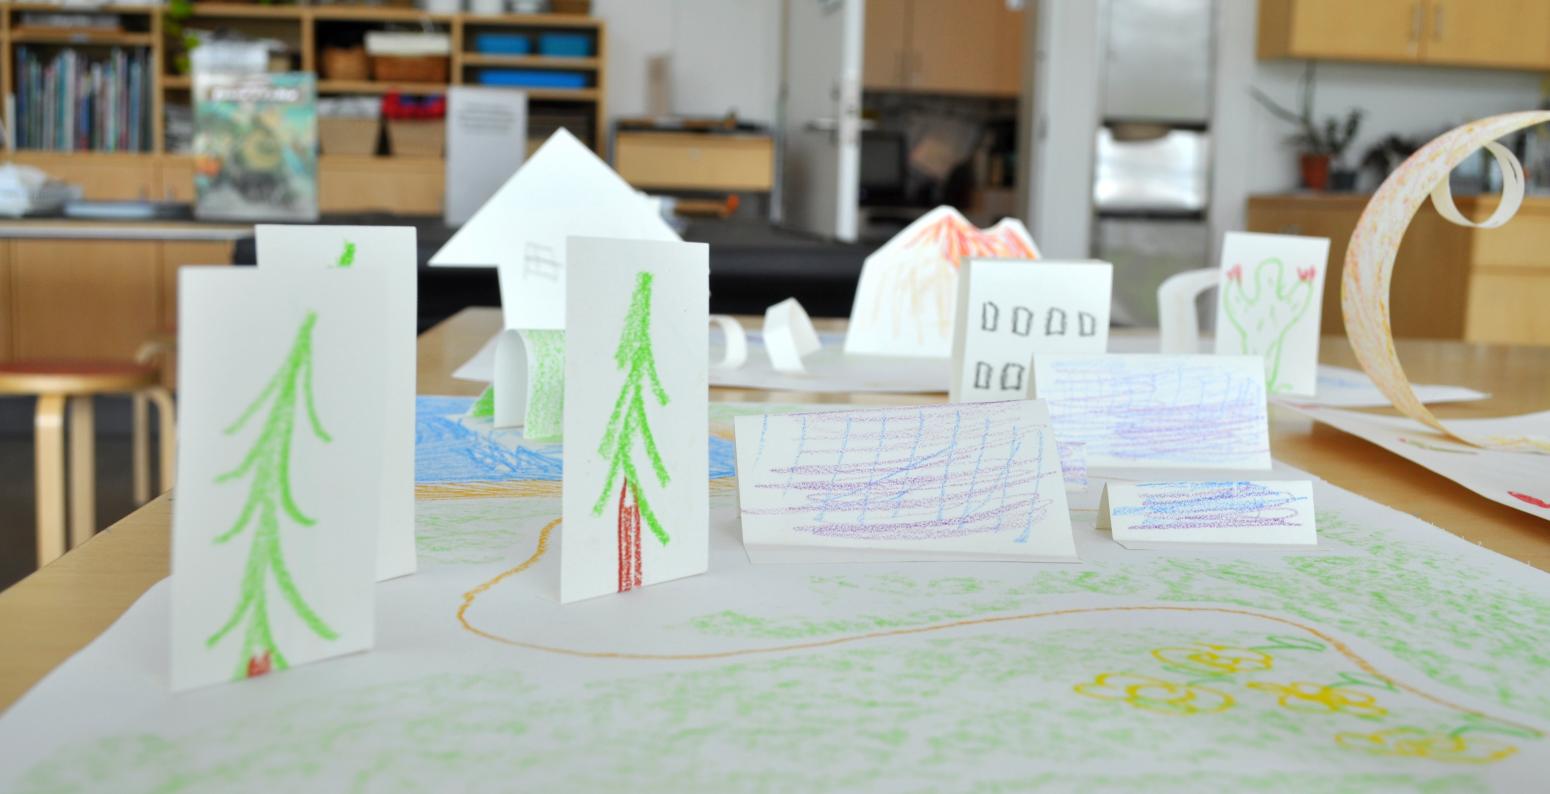 A map drawing with paper trees and bridges standing up on top.